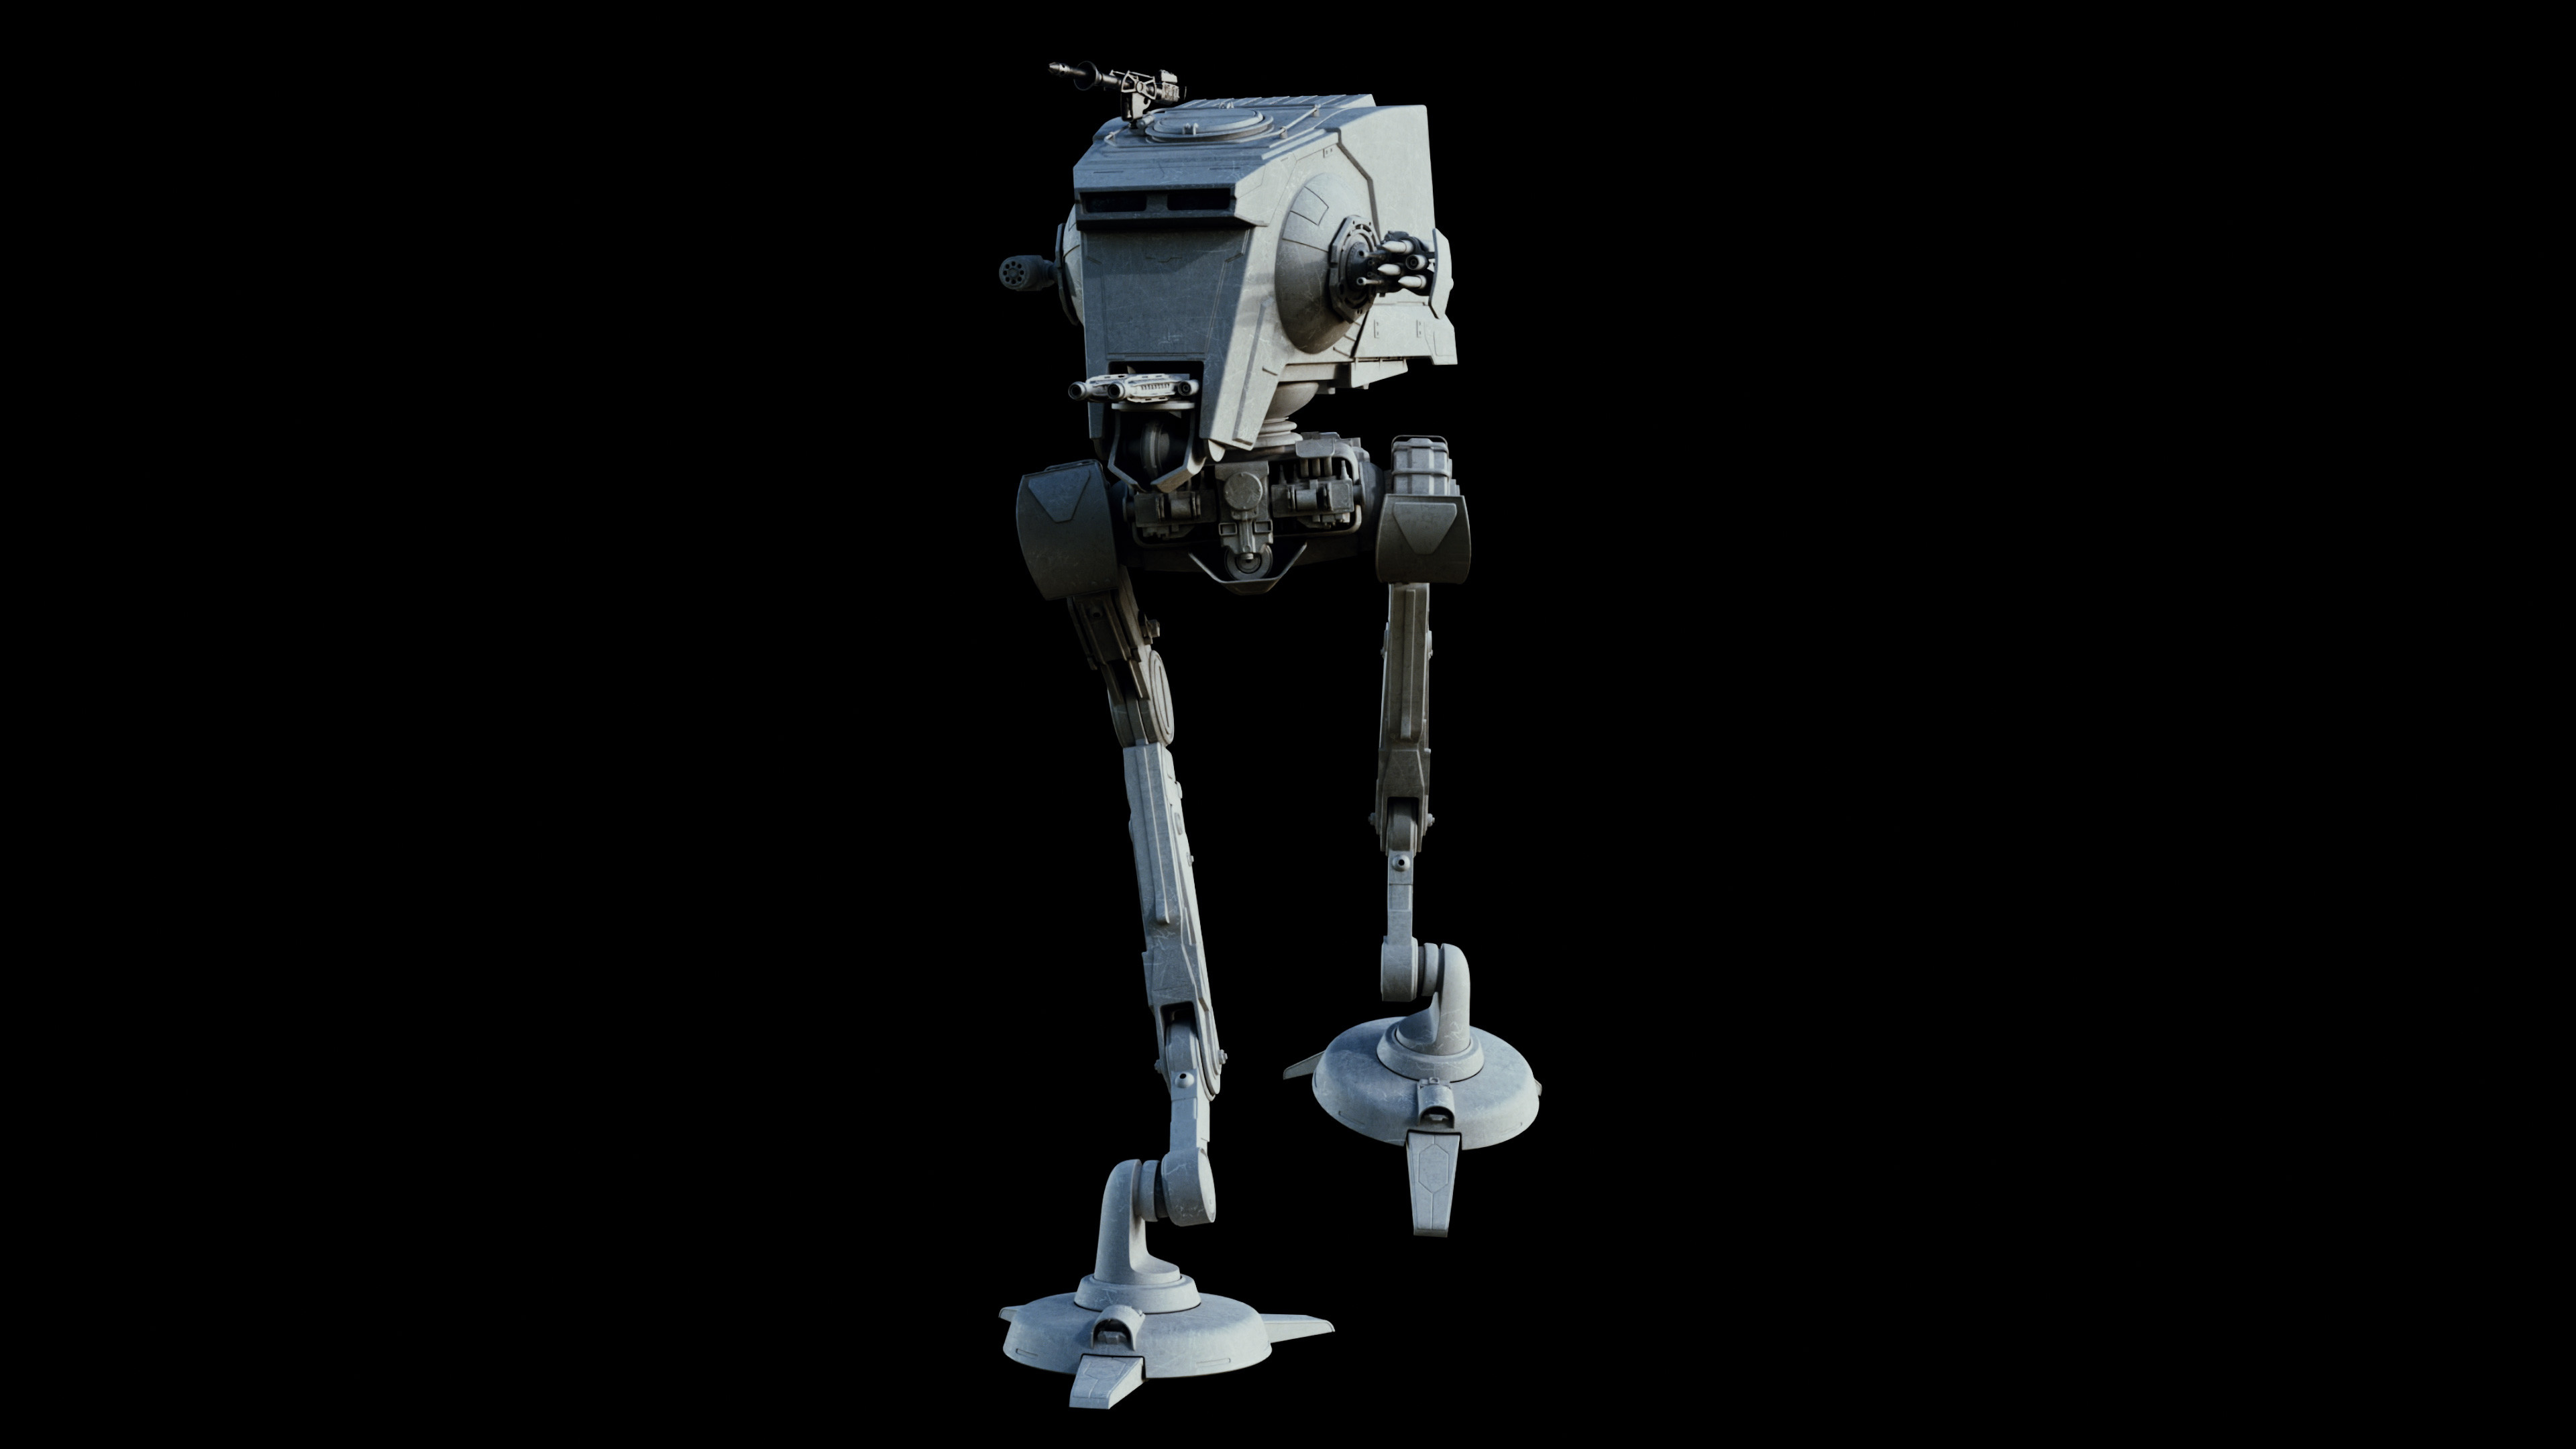 [Star Wars] AT-ST (All Terrain Scout Transport)